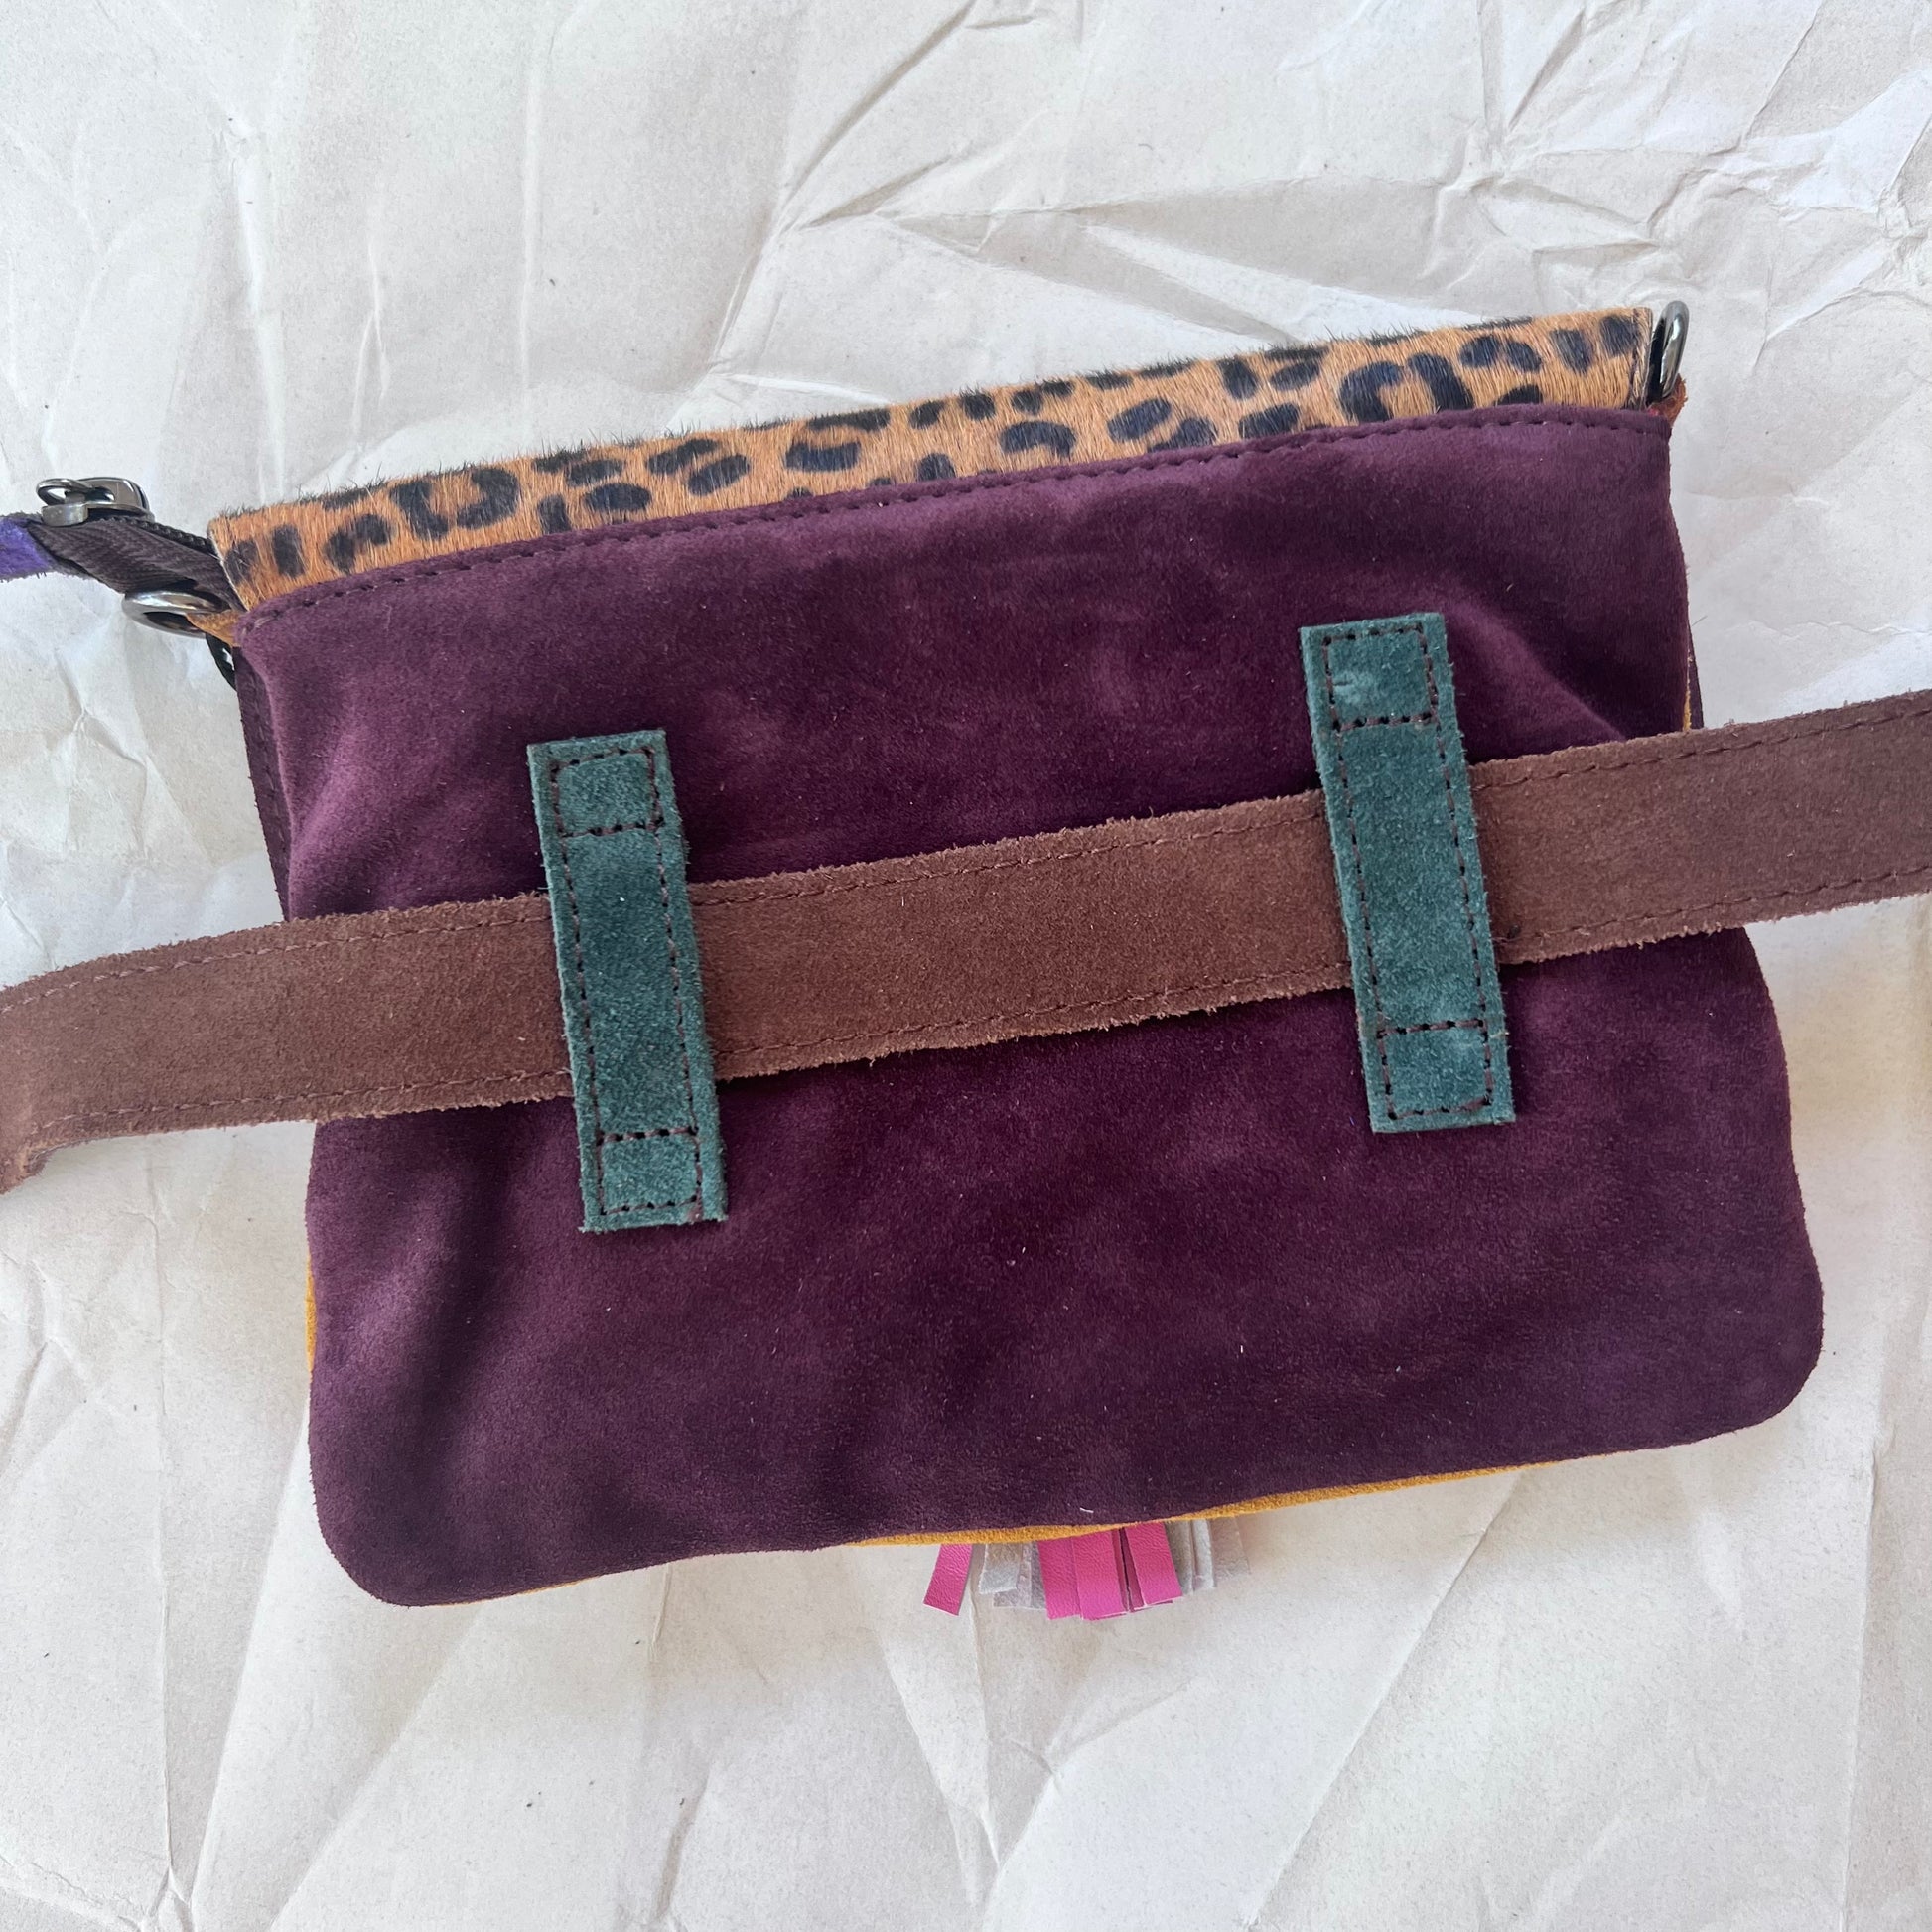 solid purple back of bag with loops holding belt.